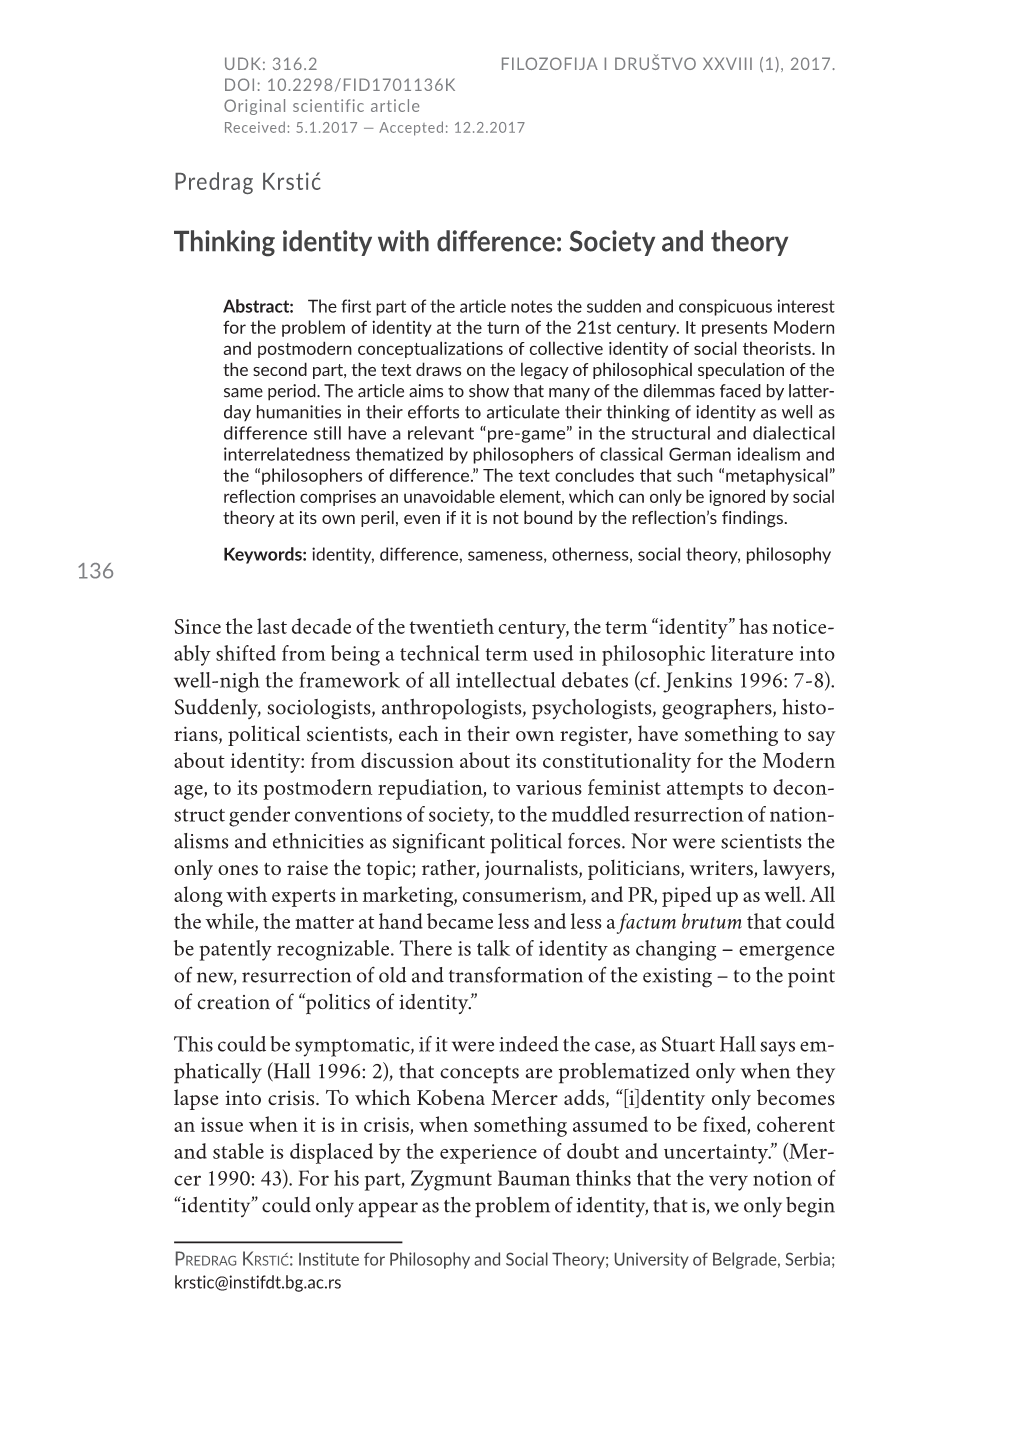 Thinking Identity with Difference: Society and Theory